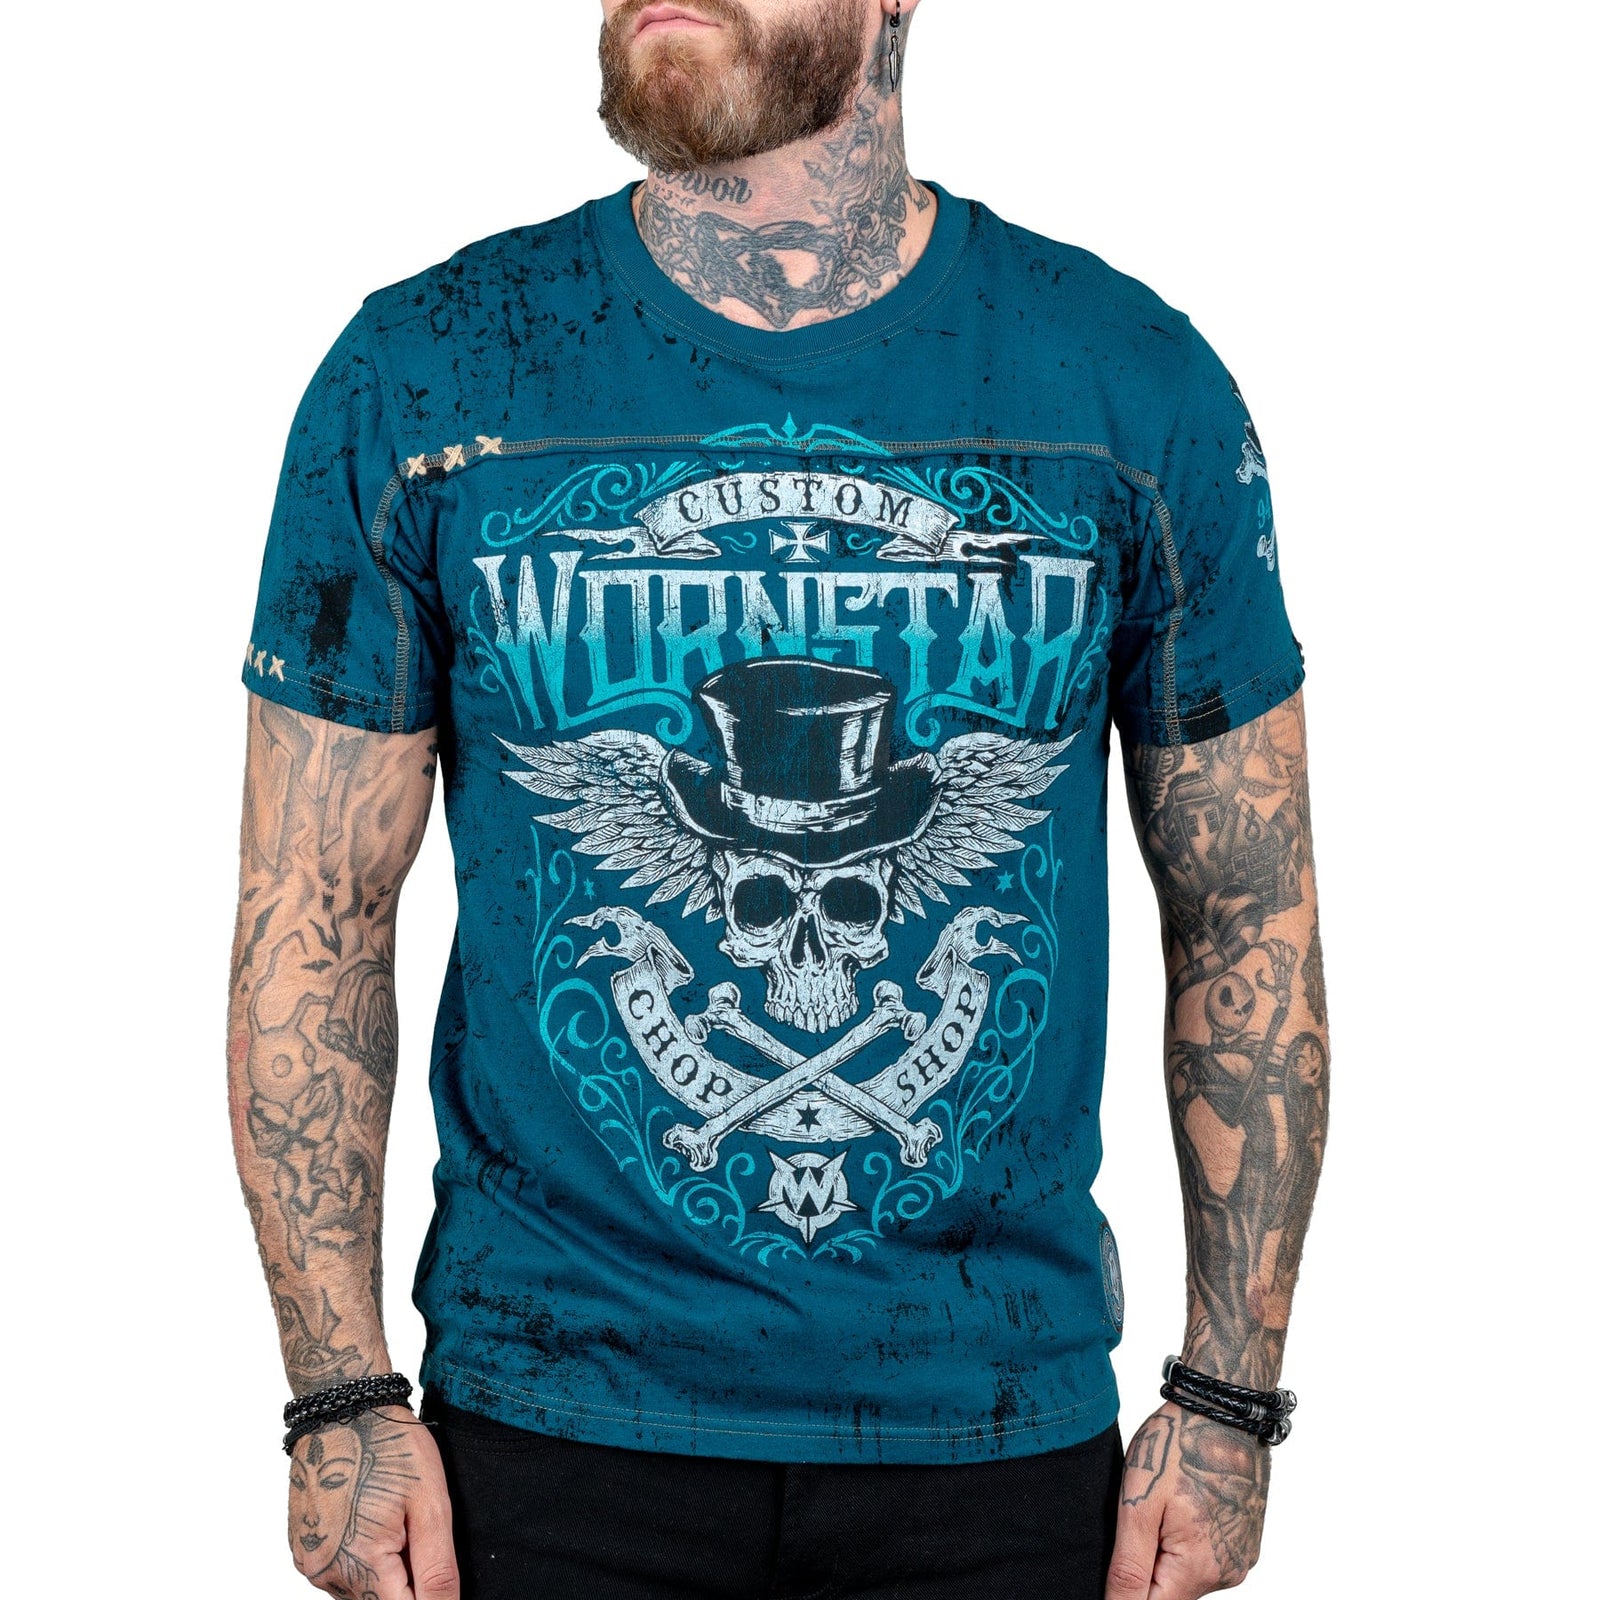 Artist Asylum Collection T-Shirt Elegantly Wasted Tee - Teal